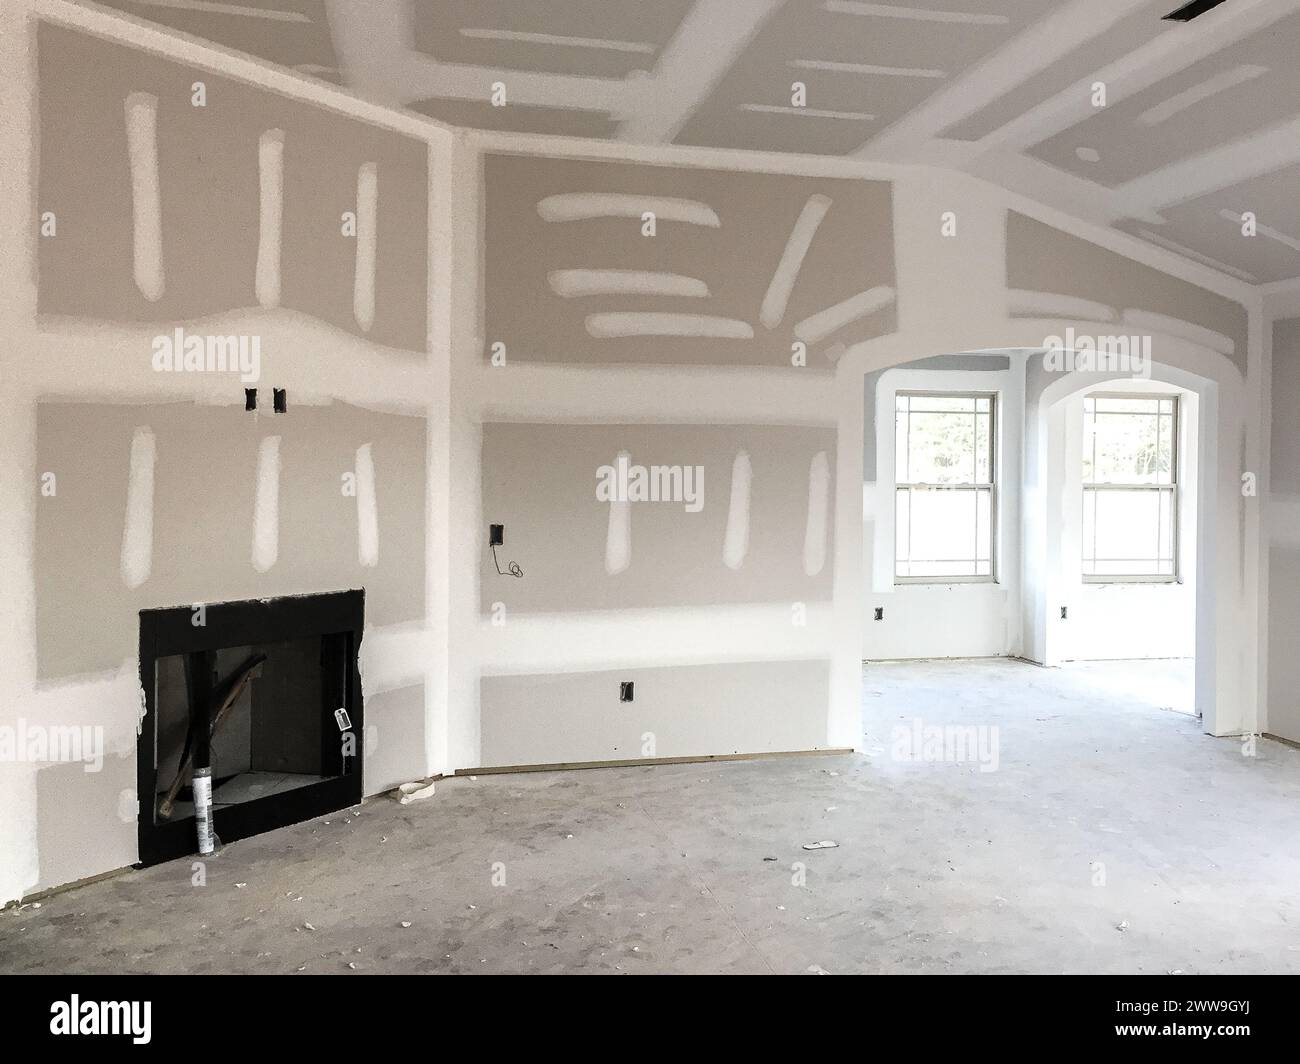 Drywall and taping interior of house construction Stock Photo